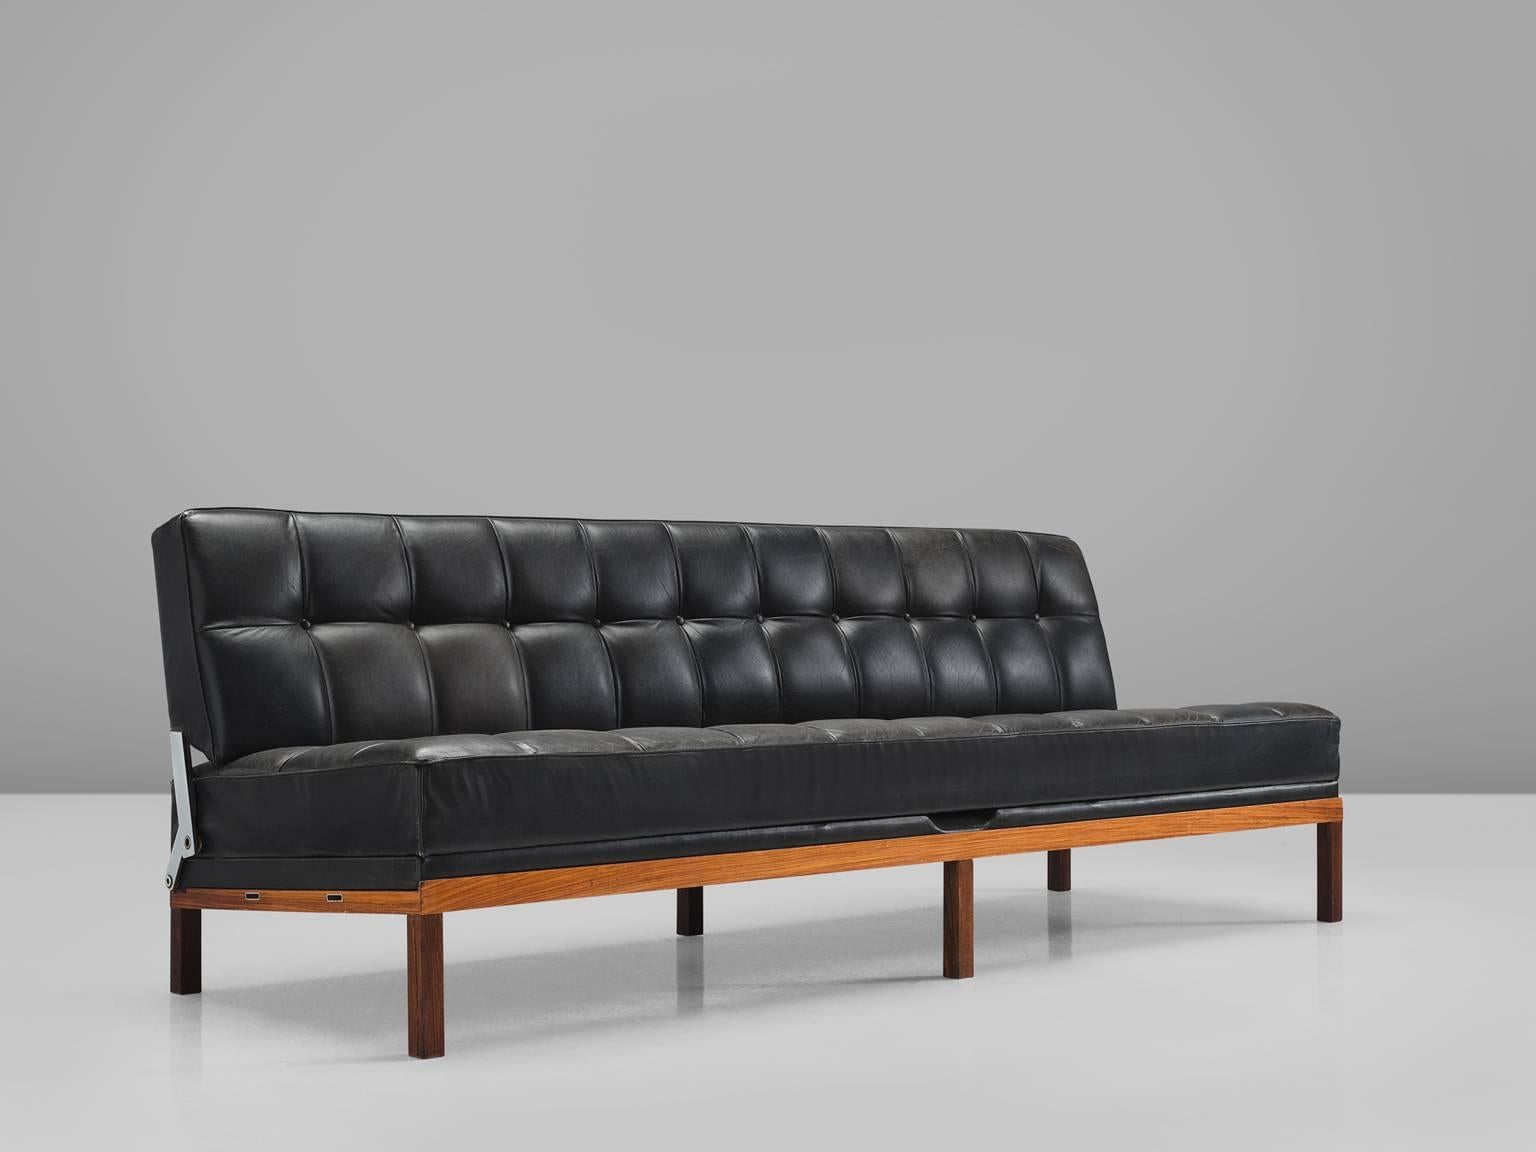 Johannes Spalt for Wittmann, black leather, rosewood, Austria, 1960s. 

This Austrian daybed is named 'Constanze'. This early model, with rosewood frame and black leather cushions is hard to find. Very elegant six slim legs which create an open